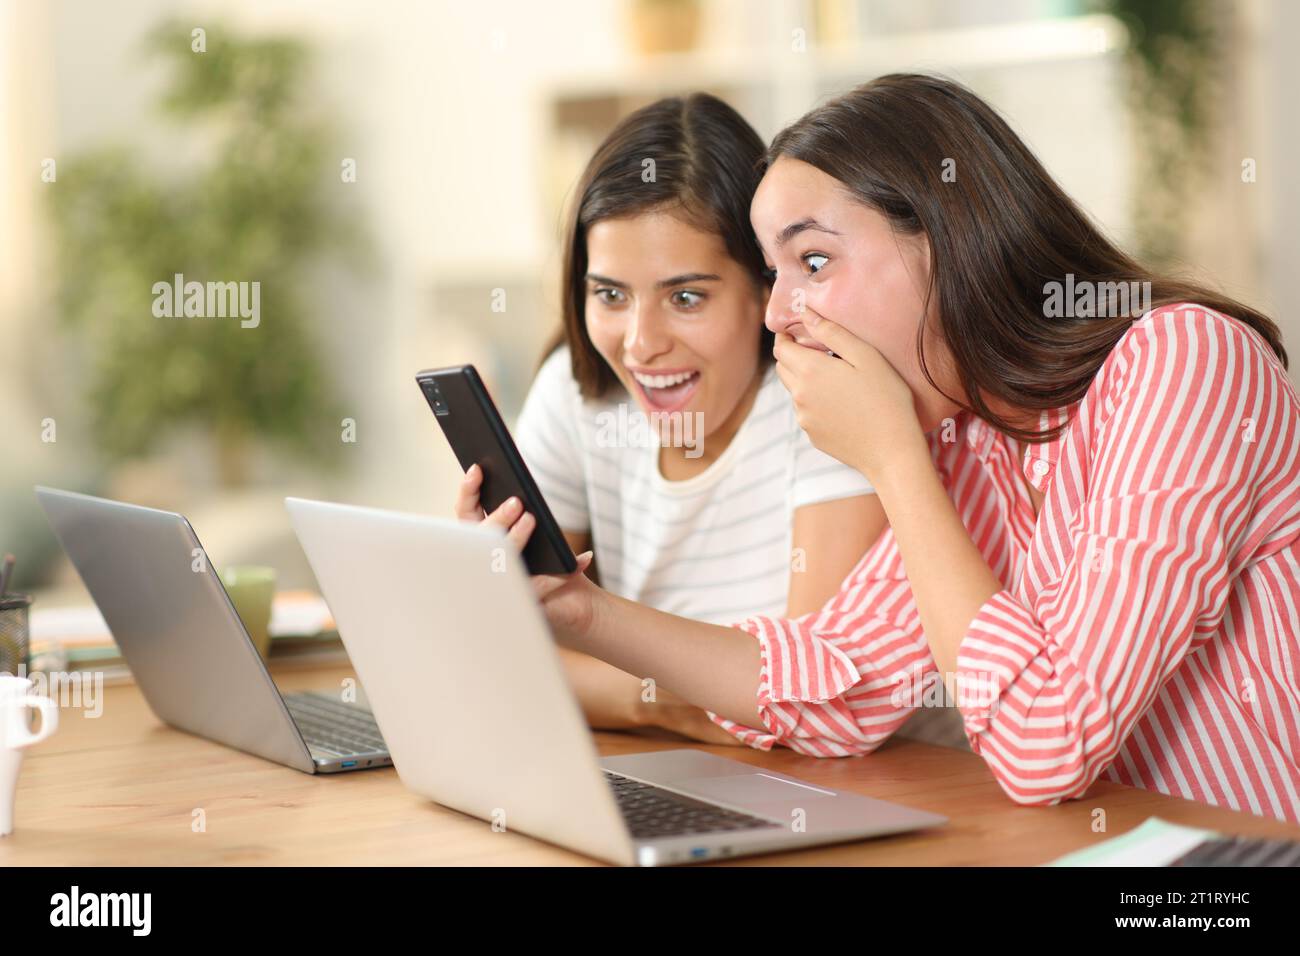 Two amazed tele workers checking phone content at home Stock Photo